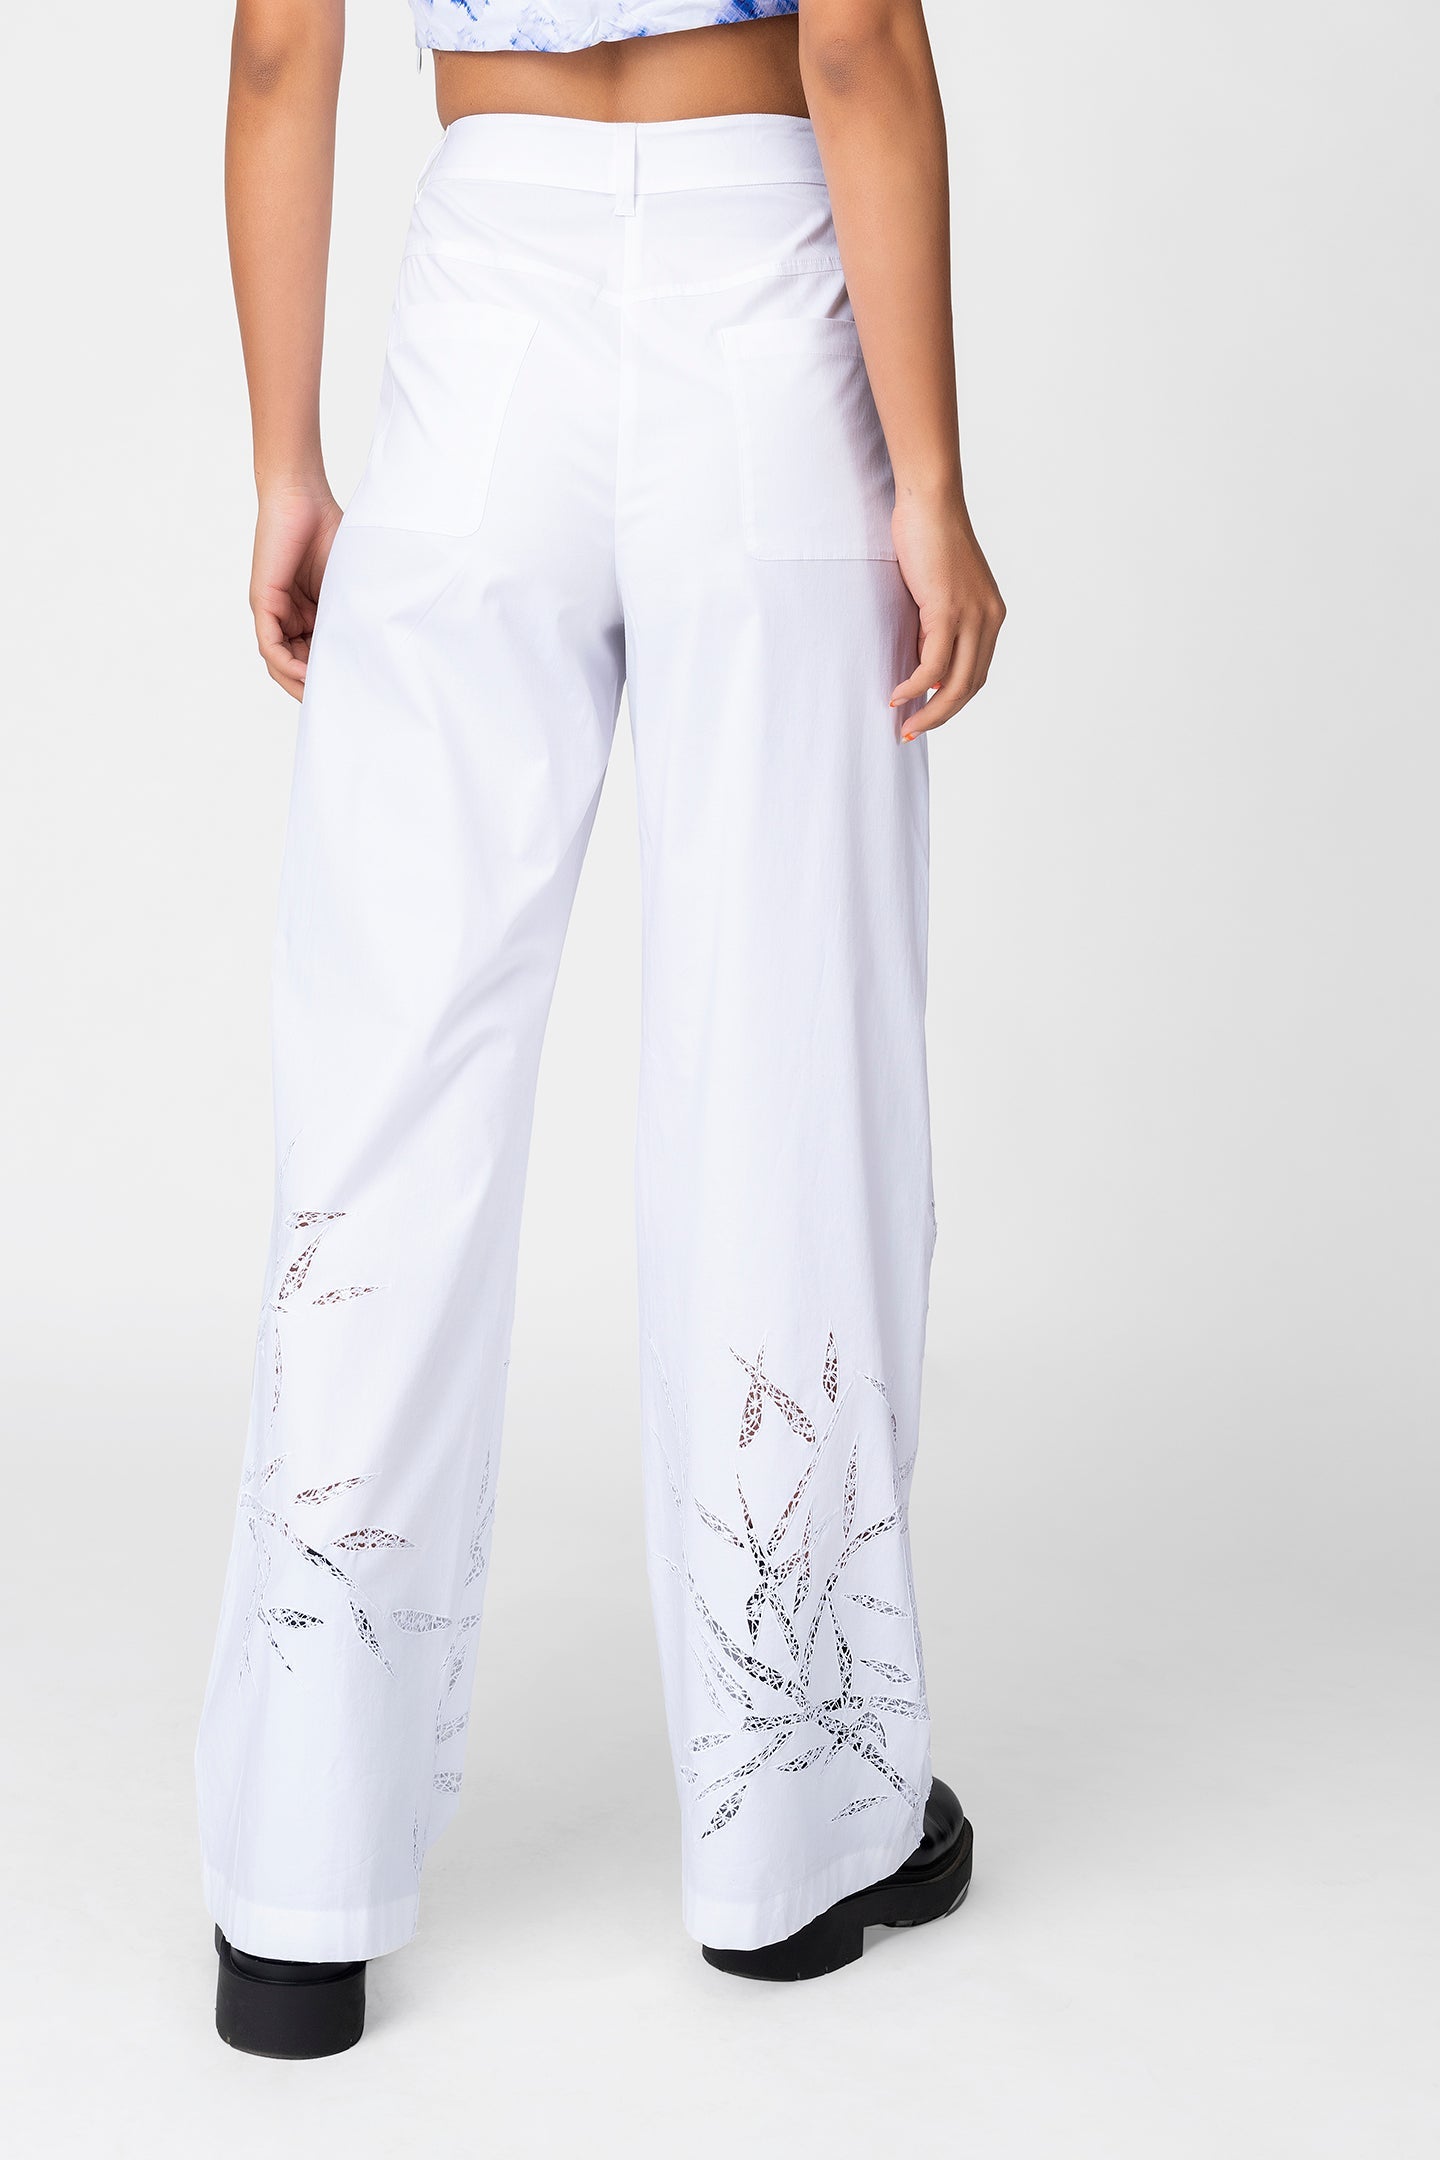 Buy Pakistani Cotton Silk Pants for Women Trousers Elasticated Online in  India  Etsy